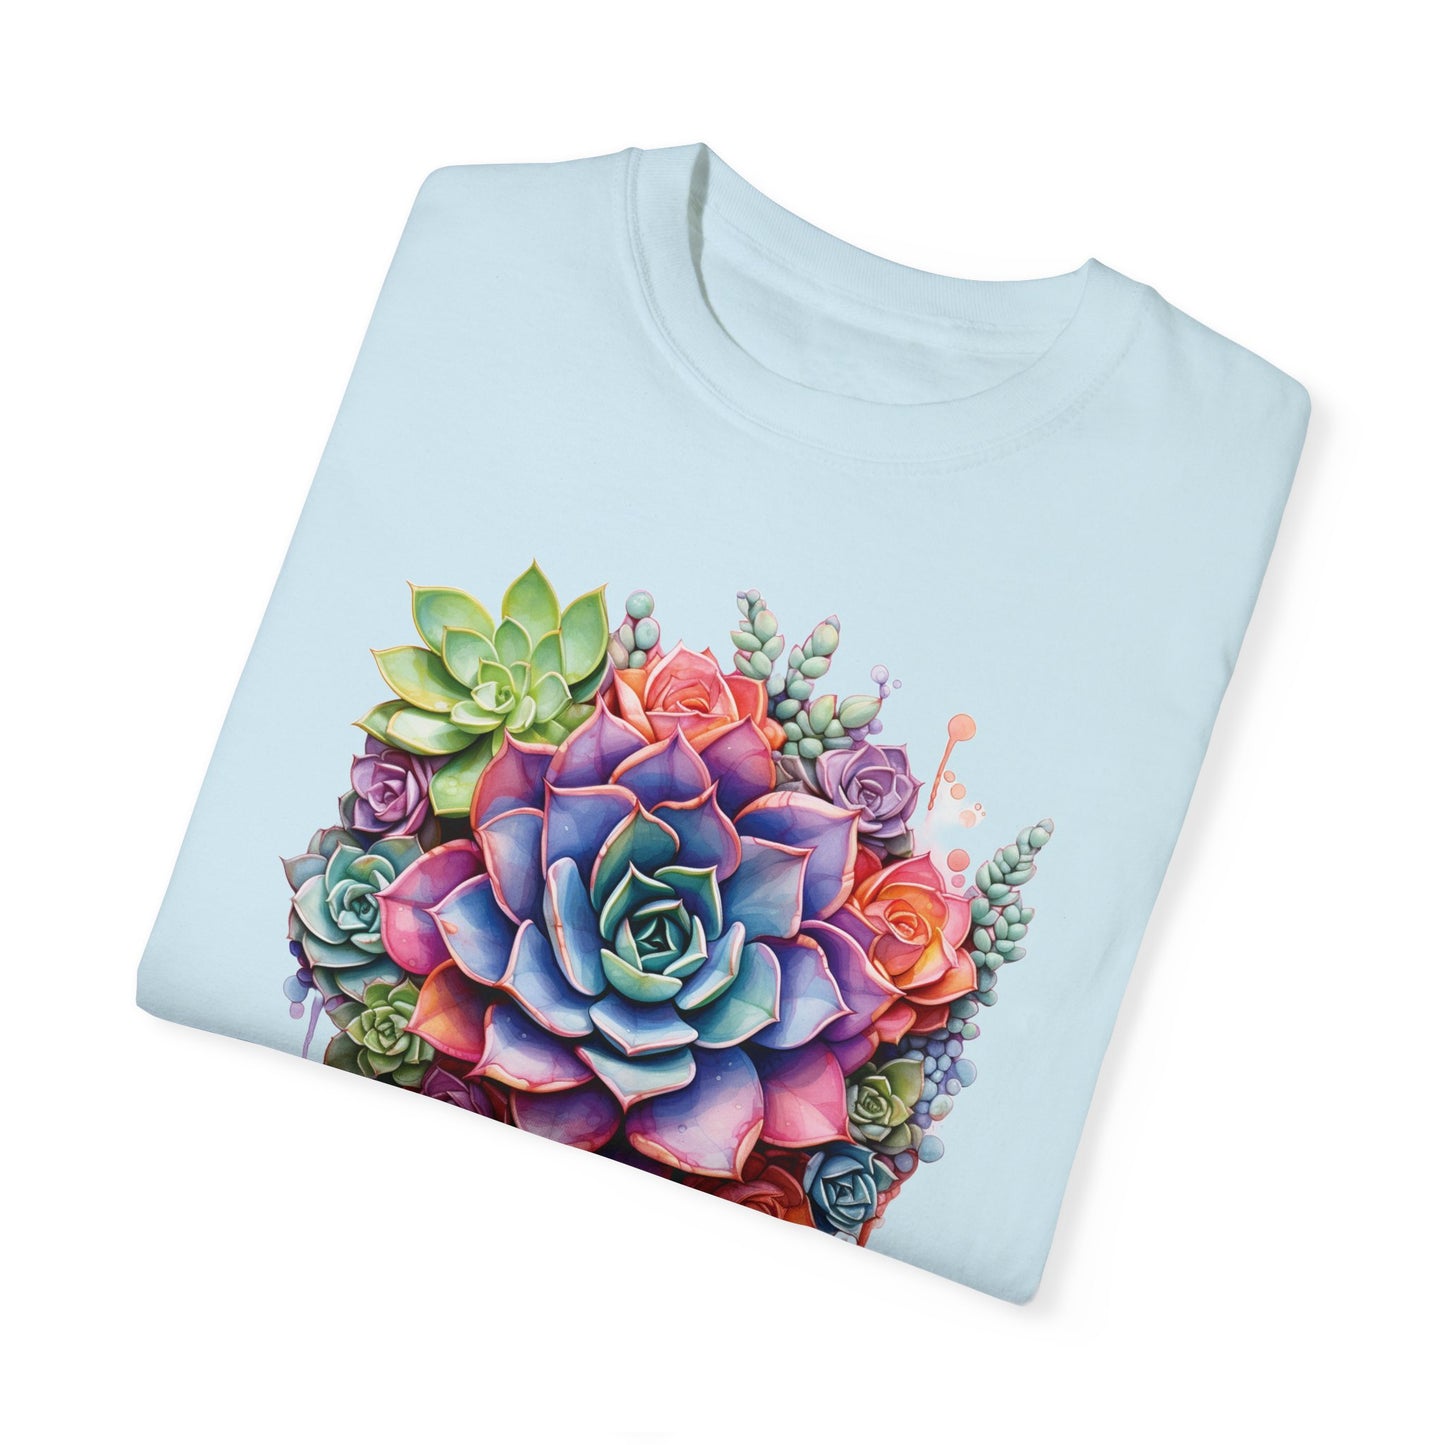 Succulent T-shirt For Cacti TShirt For Watercolor T Shirt For Plant Lovers Tee